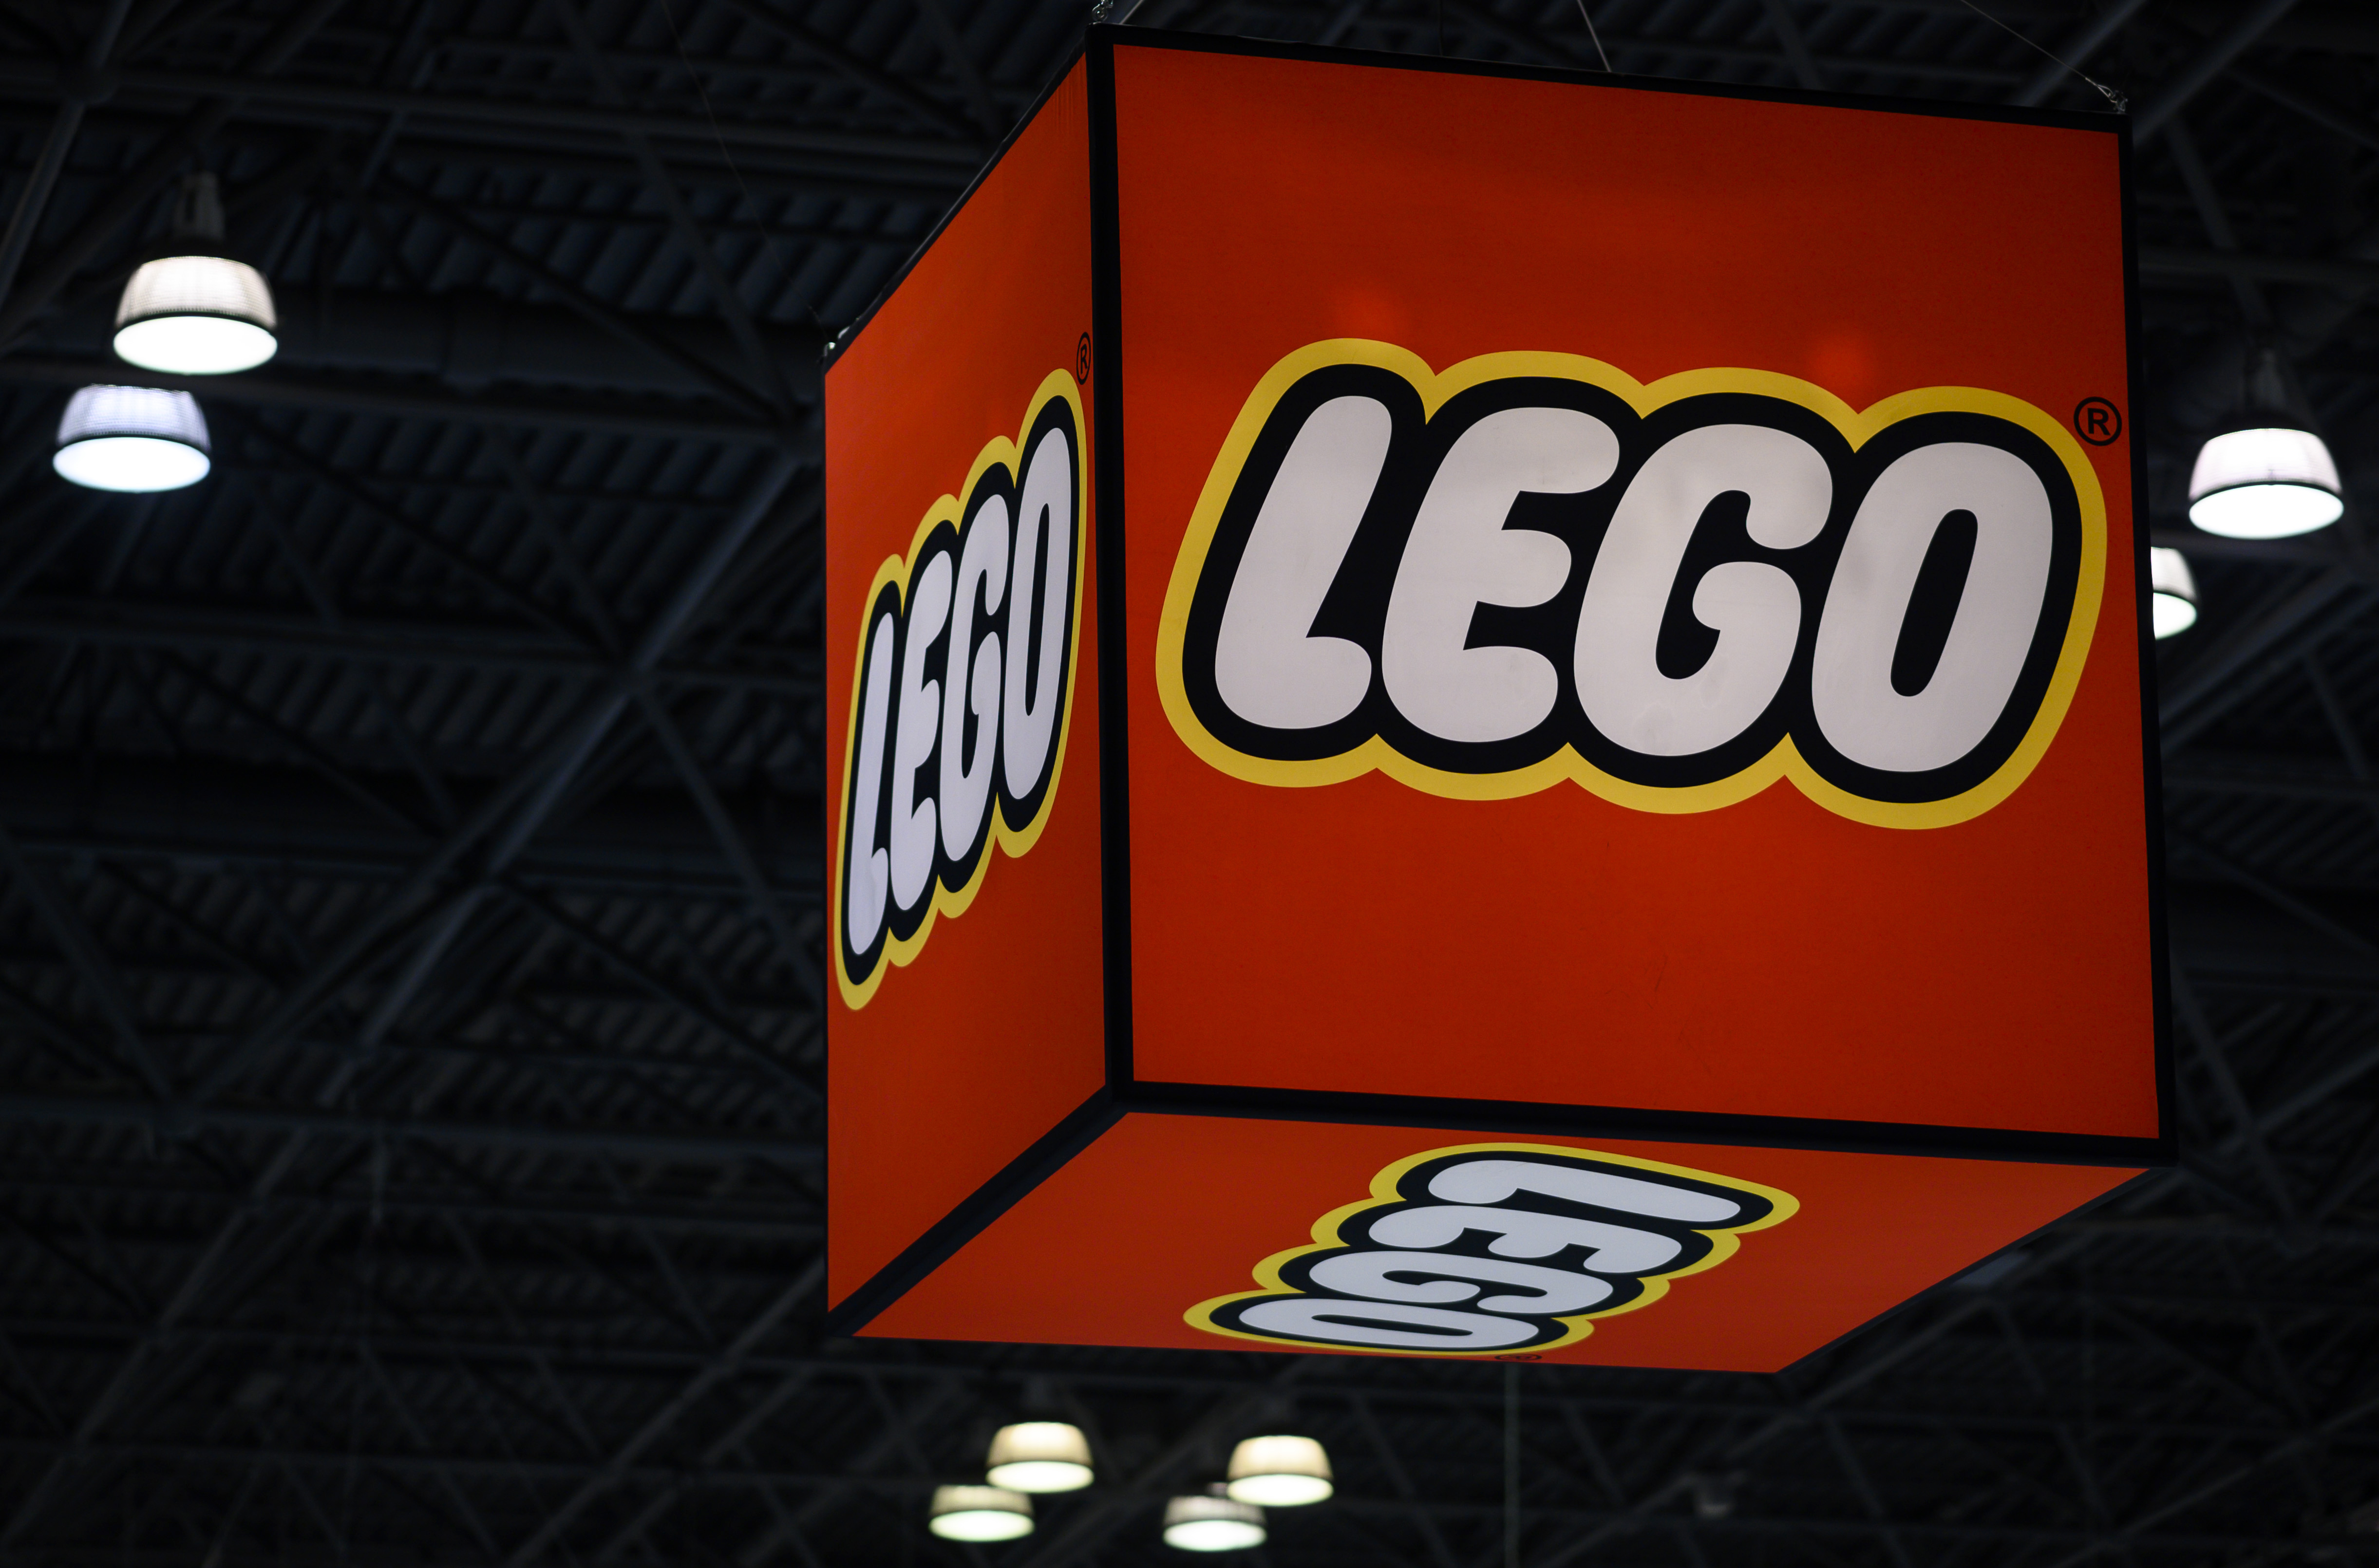 In this file photo taken on February 16, 2019 a Lego logo is pictured during the annual New York Toy Fair, at the Jacob K Javits Convention Center in New York City. - AFP